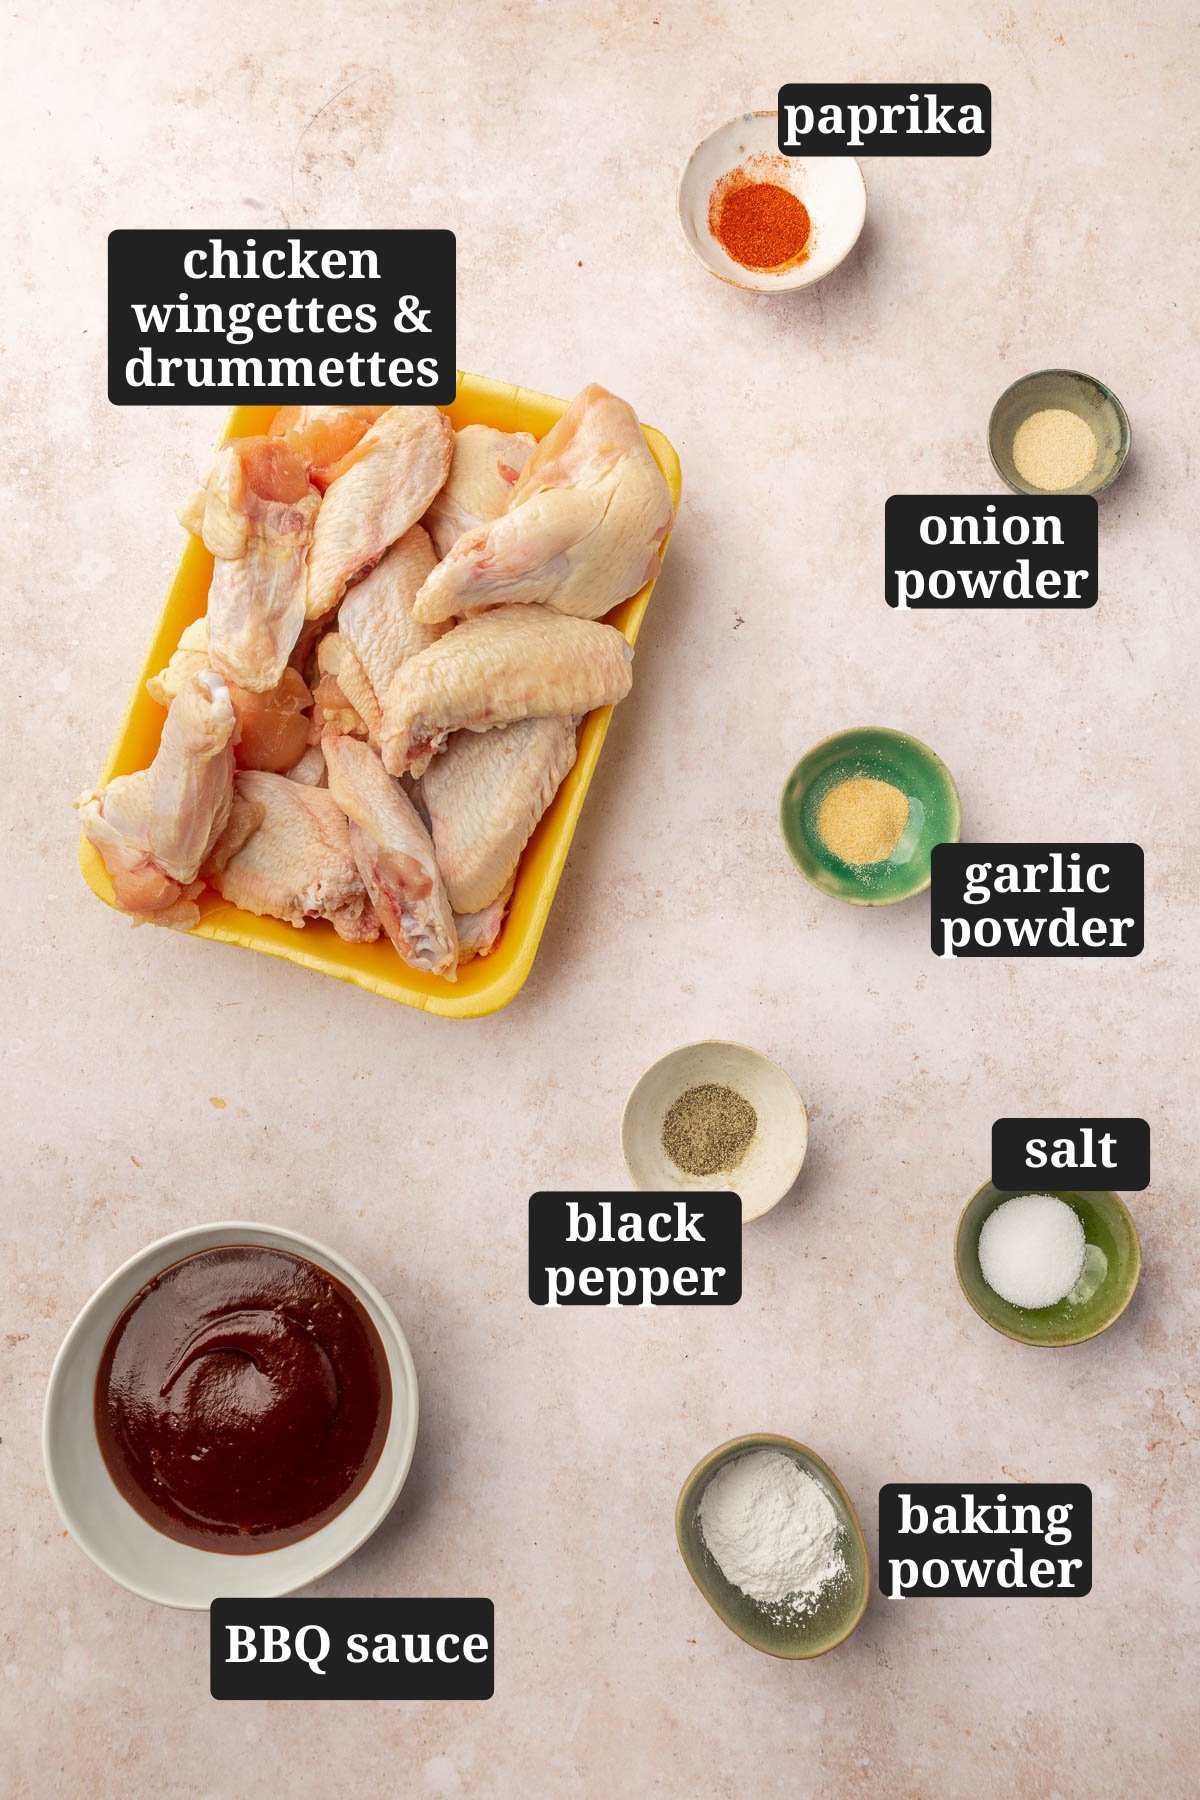 An overhead view of ingredients in small bowls to make gluten free chicken wings, including chicken wingettes and drumettes, paprika, onion powder, garlic powder, black pepper, salt, baking powder and BBQ sauce with text overlays over each ingredient.